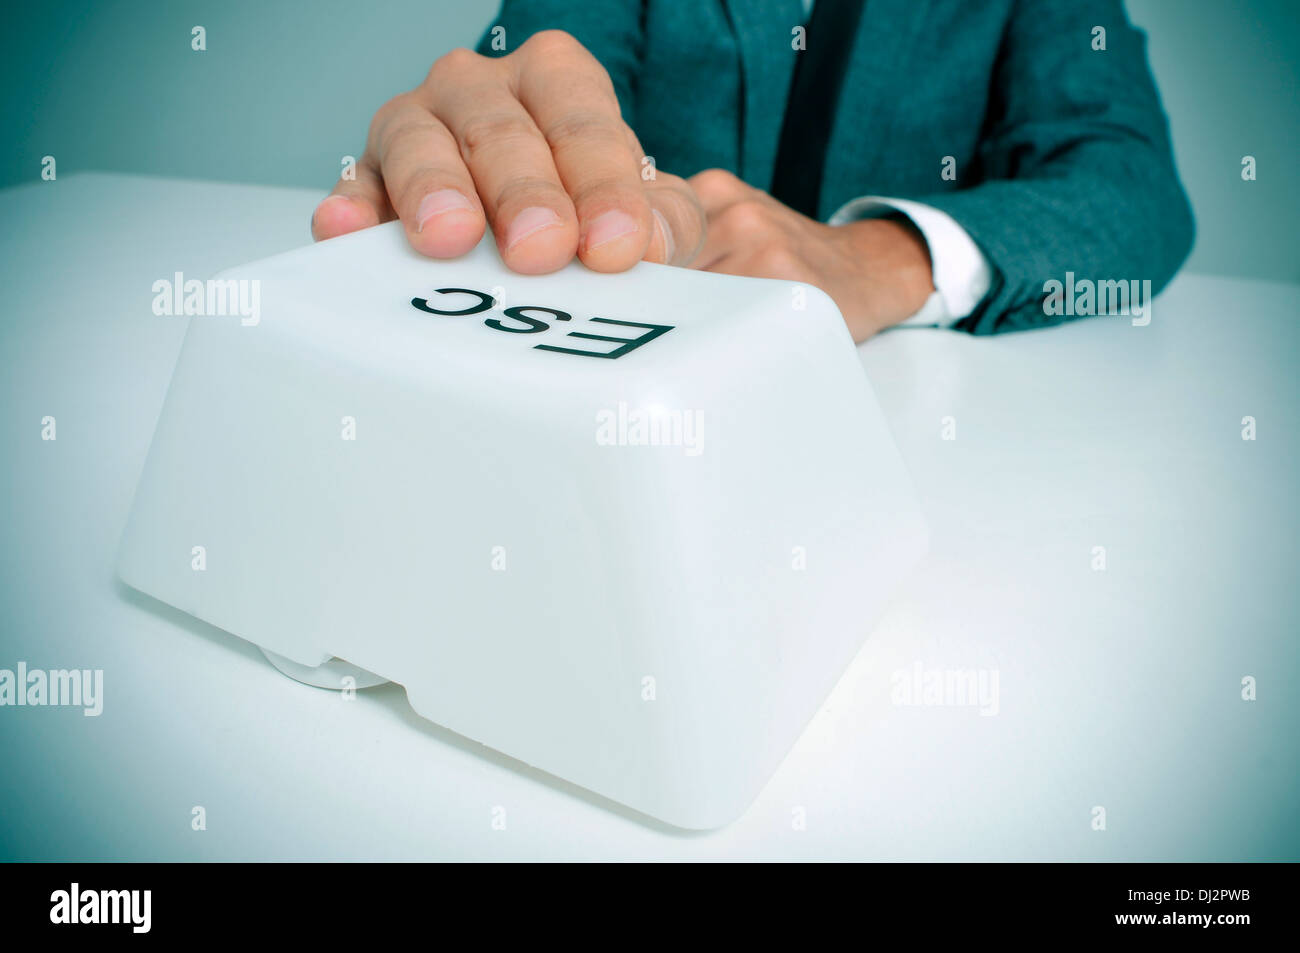 man wearing a suit sitting in a table pressing a giant escape key with his hand Stock Photo